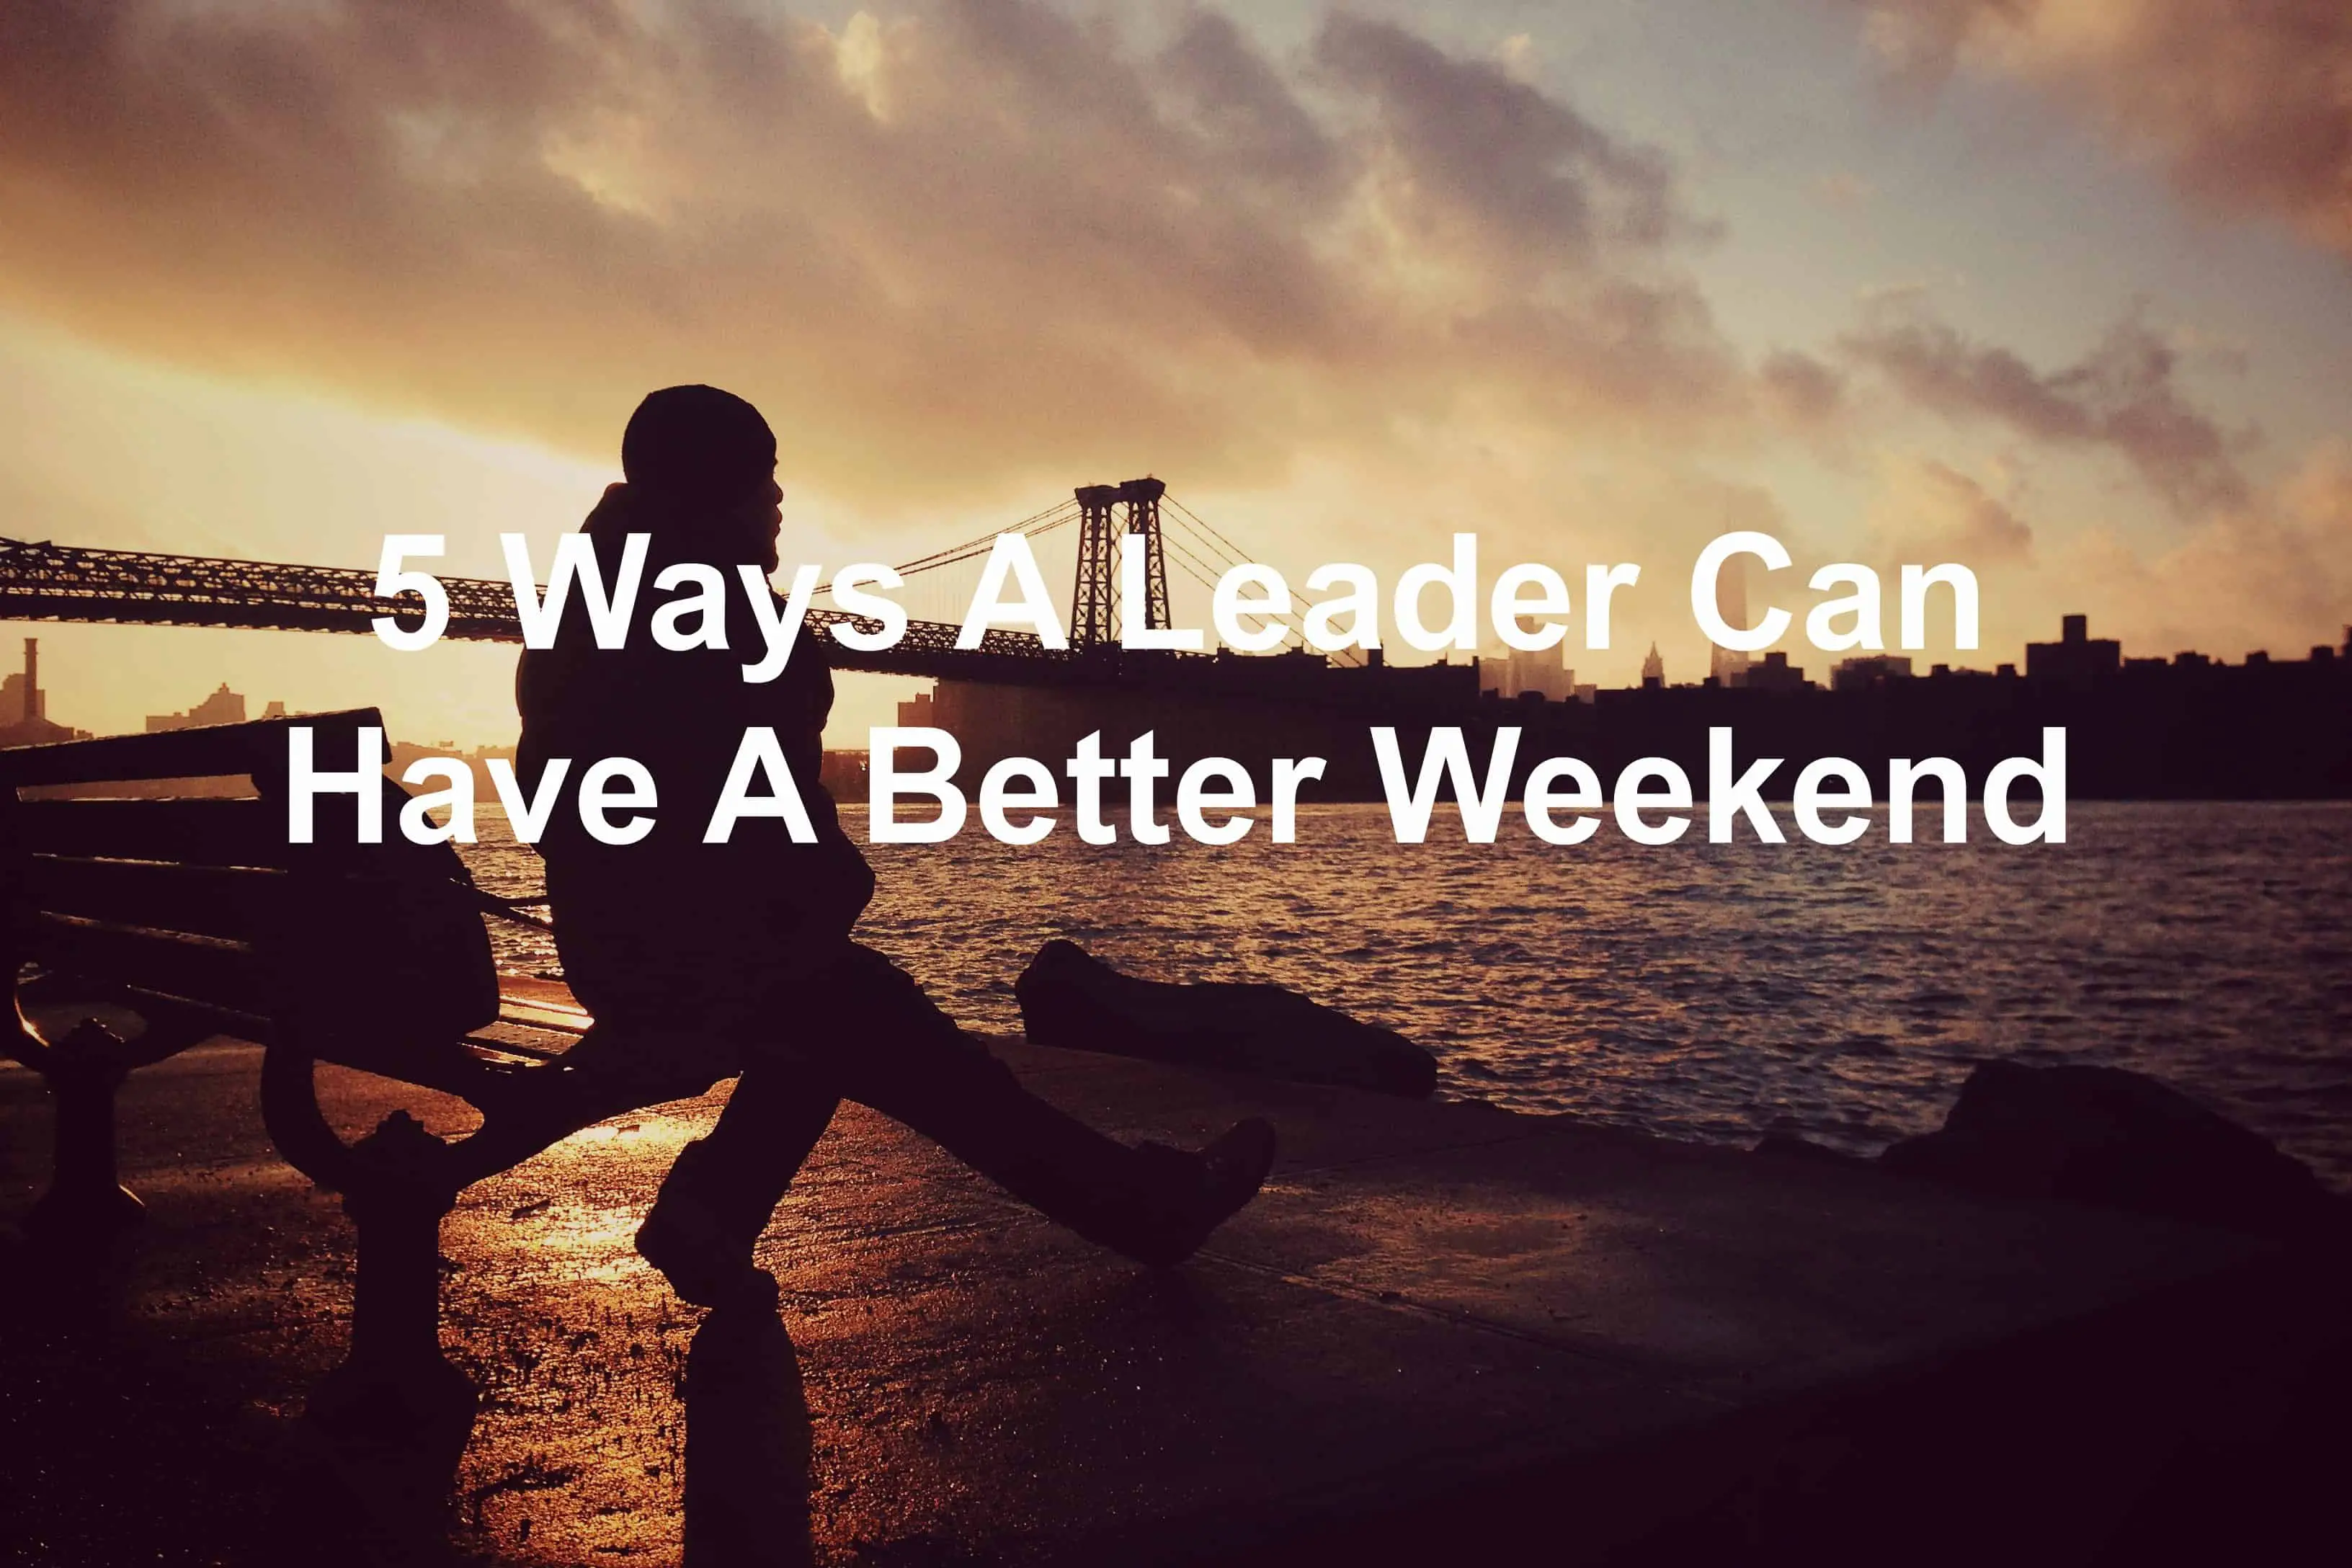 Leaders can have a good weekend